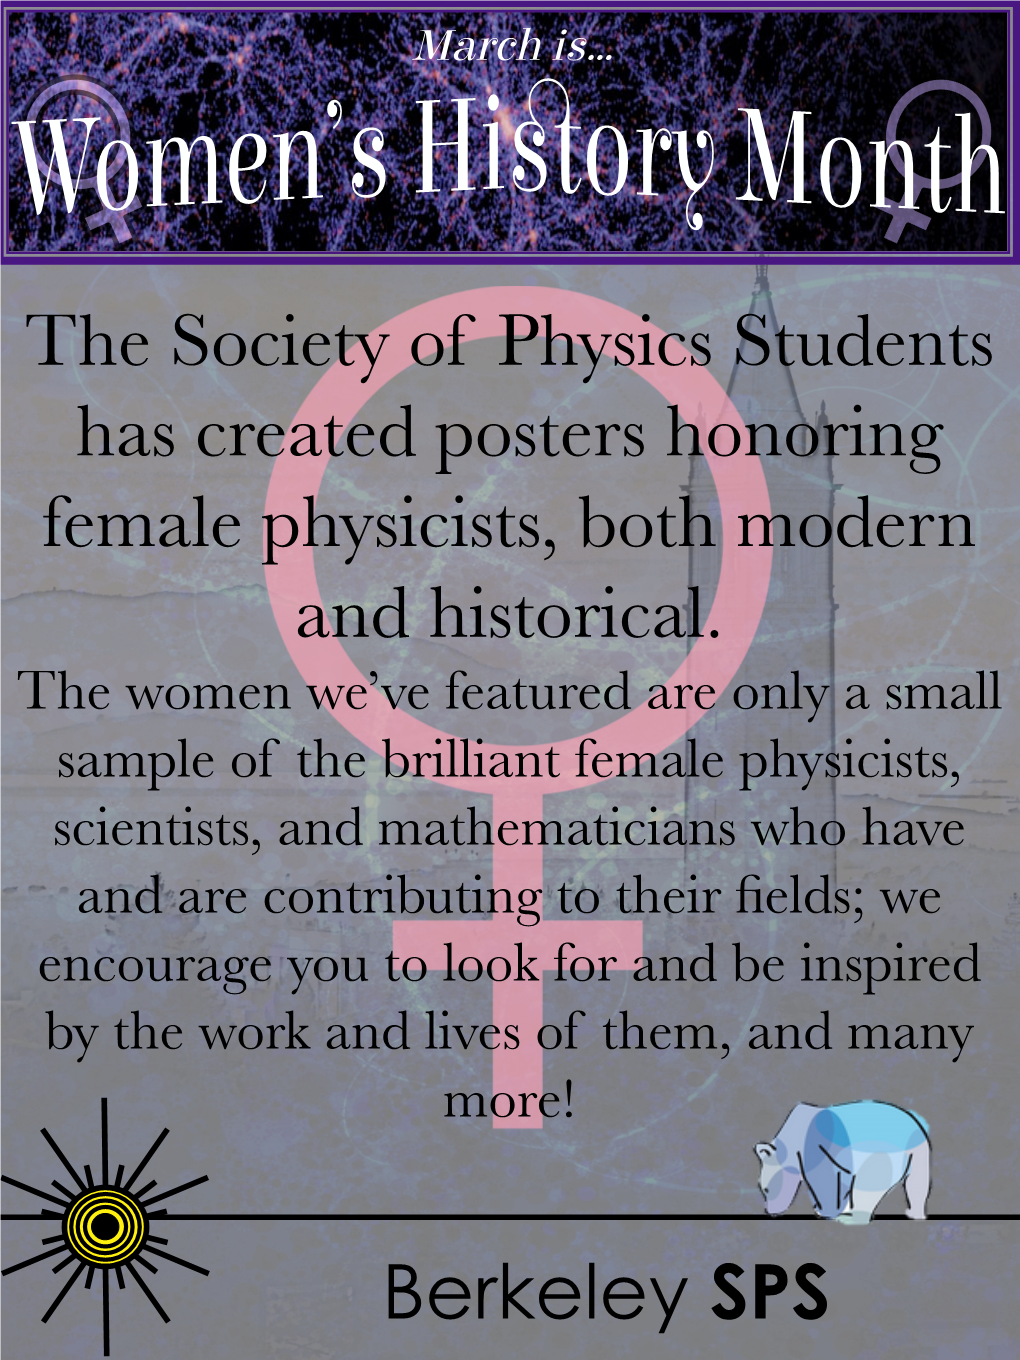 The Society of Physics Students Has Created Posters Honoring Female Physicists, Both Modern and Historical